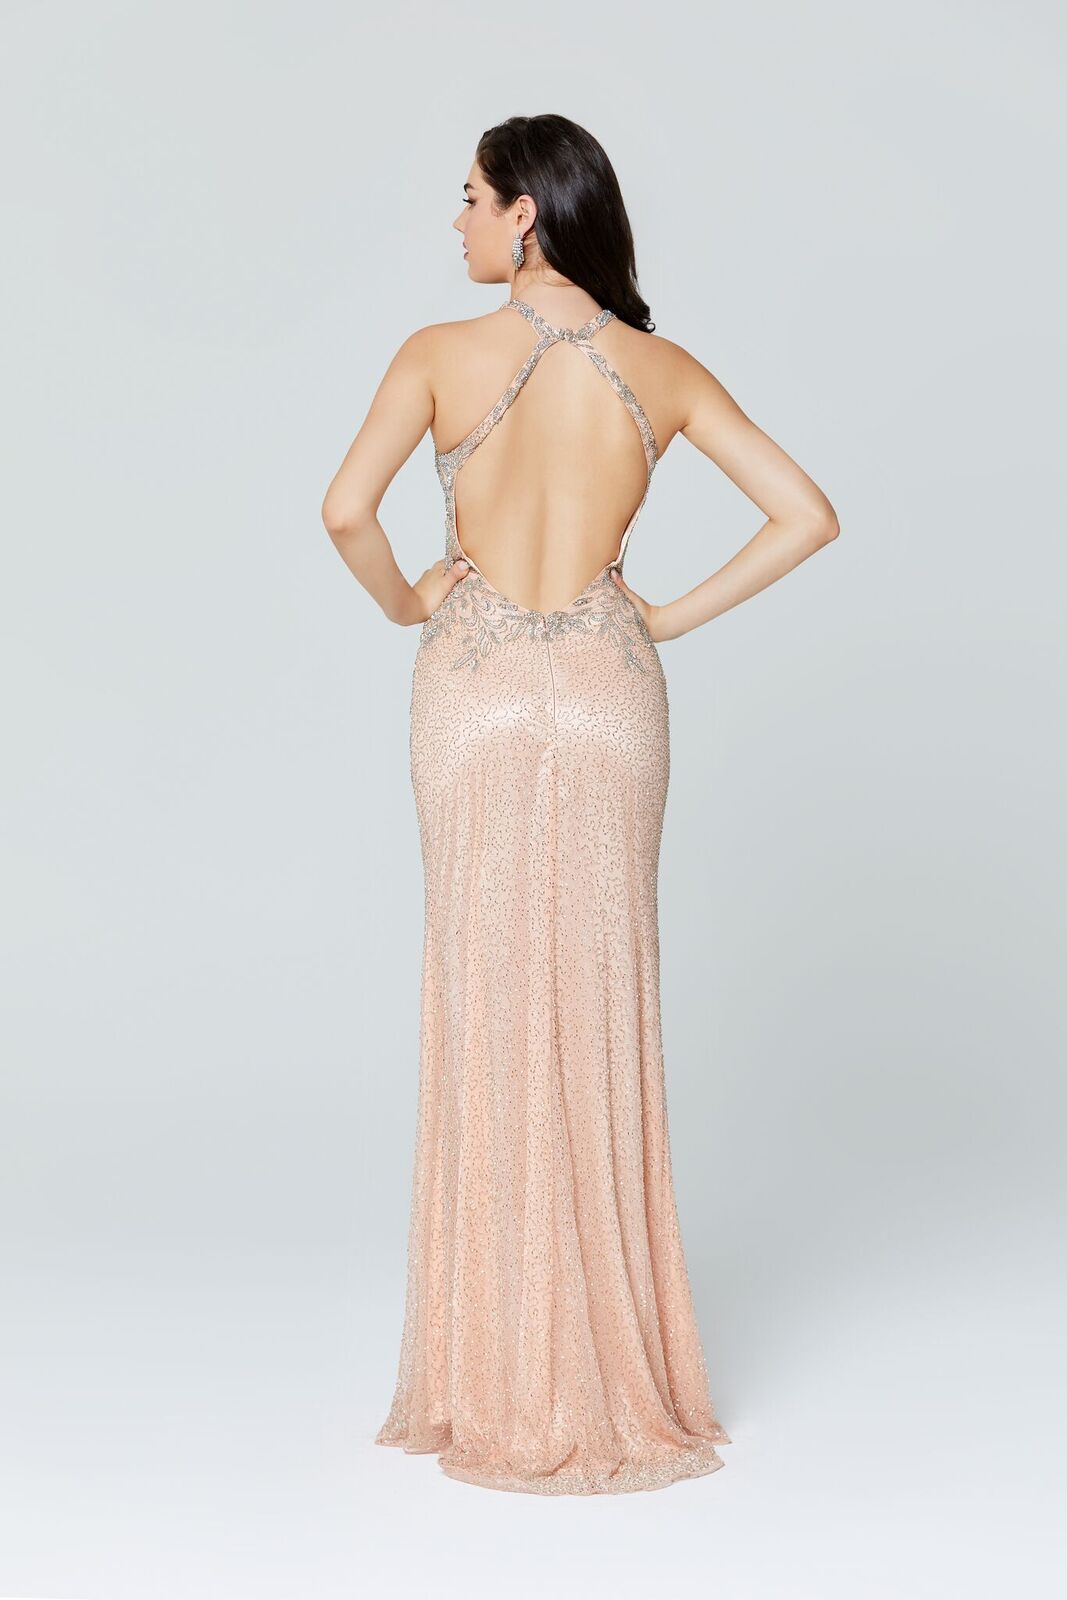 Primavera Couture 3409 is a beaded high neckline Prom Dress, Pageant Gown, Wedding Dress & Formal Evening Wear gown. This gown features a high neckline with sequins &  beading embellishing this long evening gown with side slit and open back   Blush